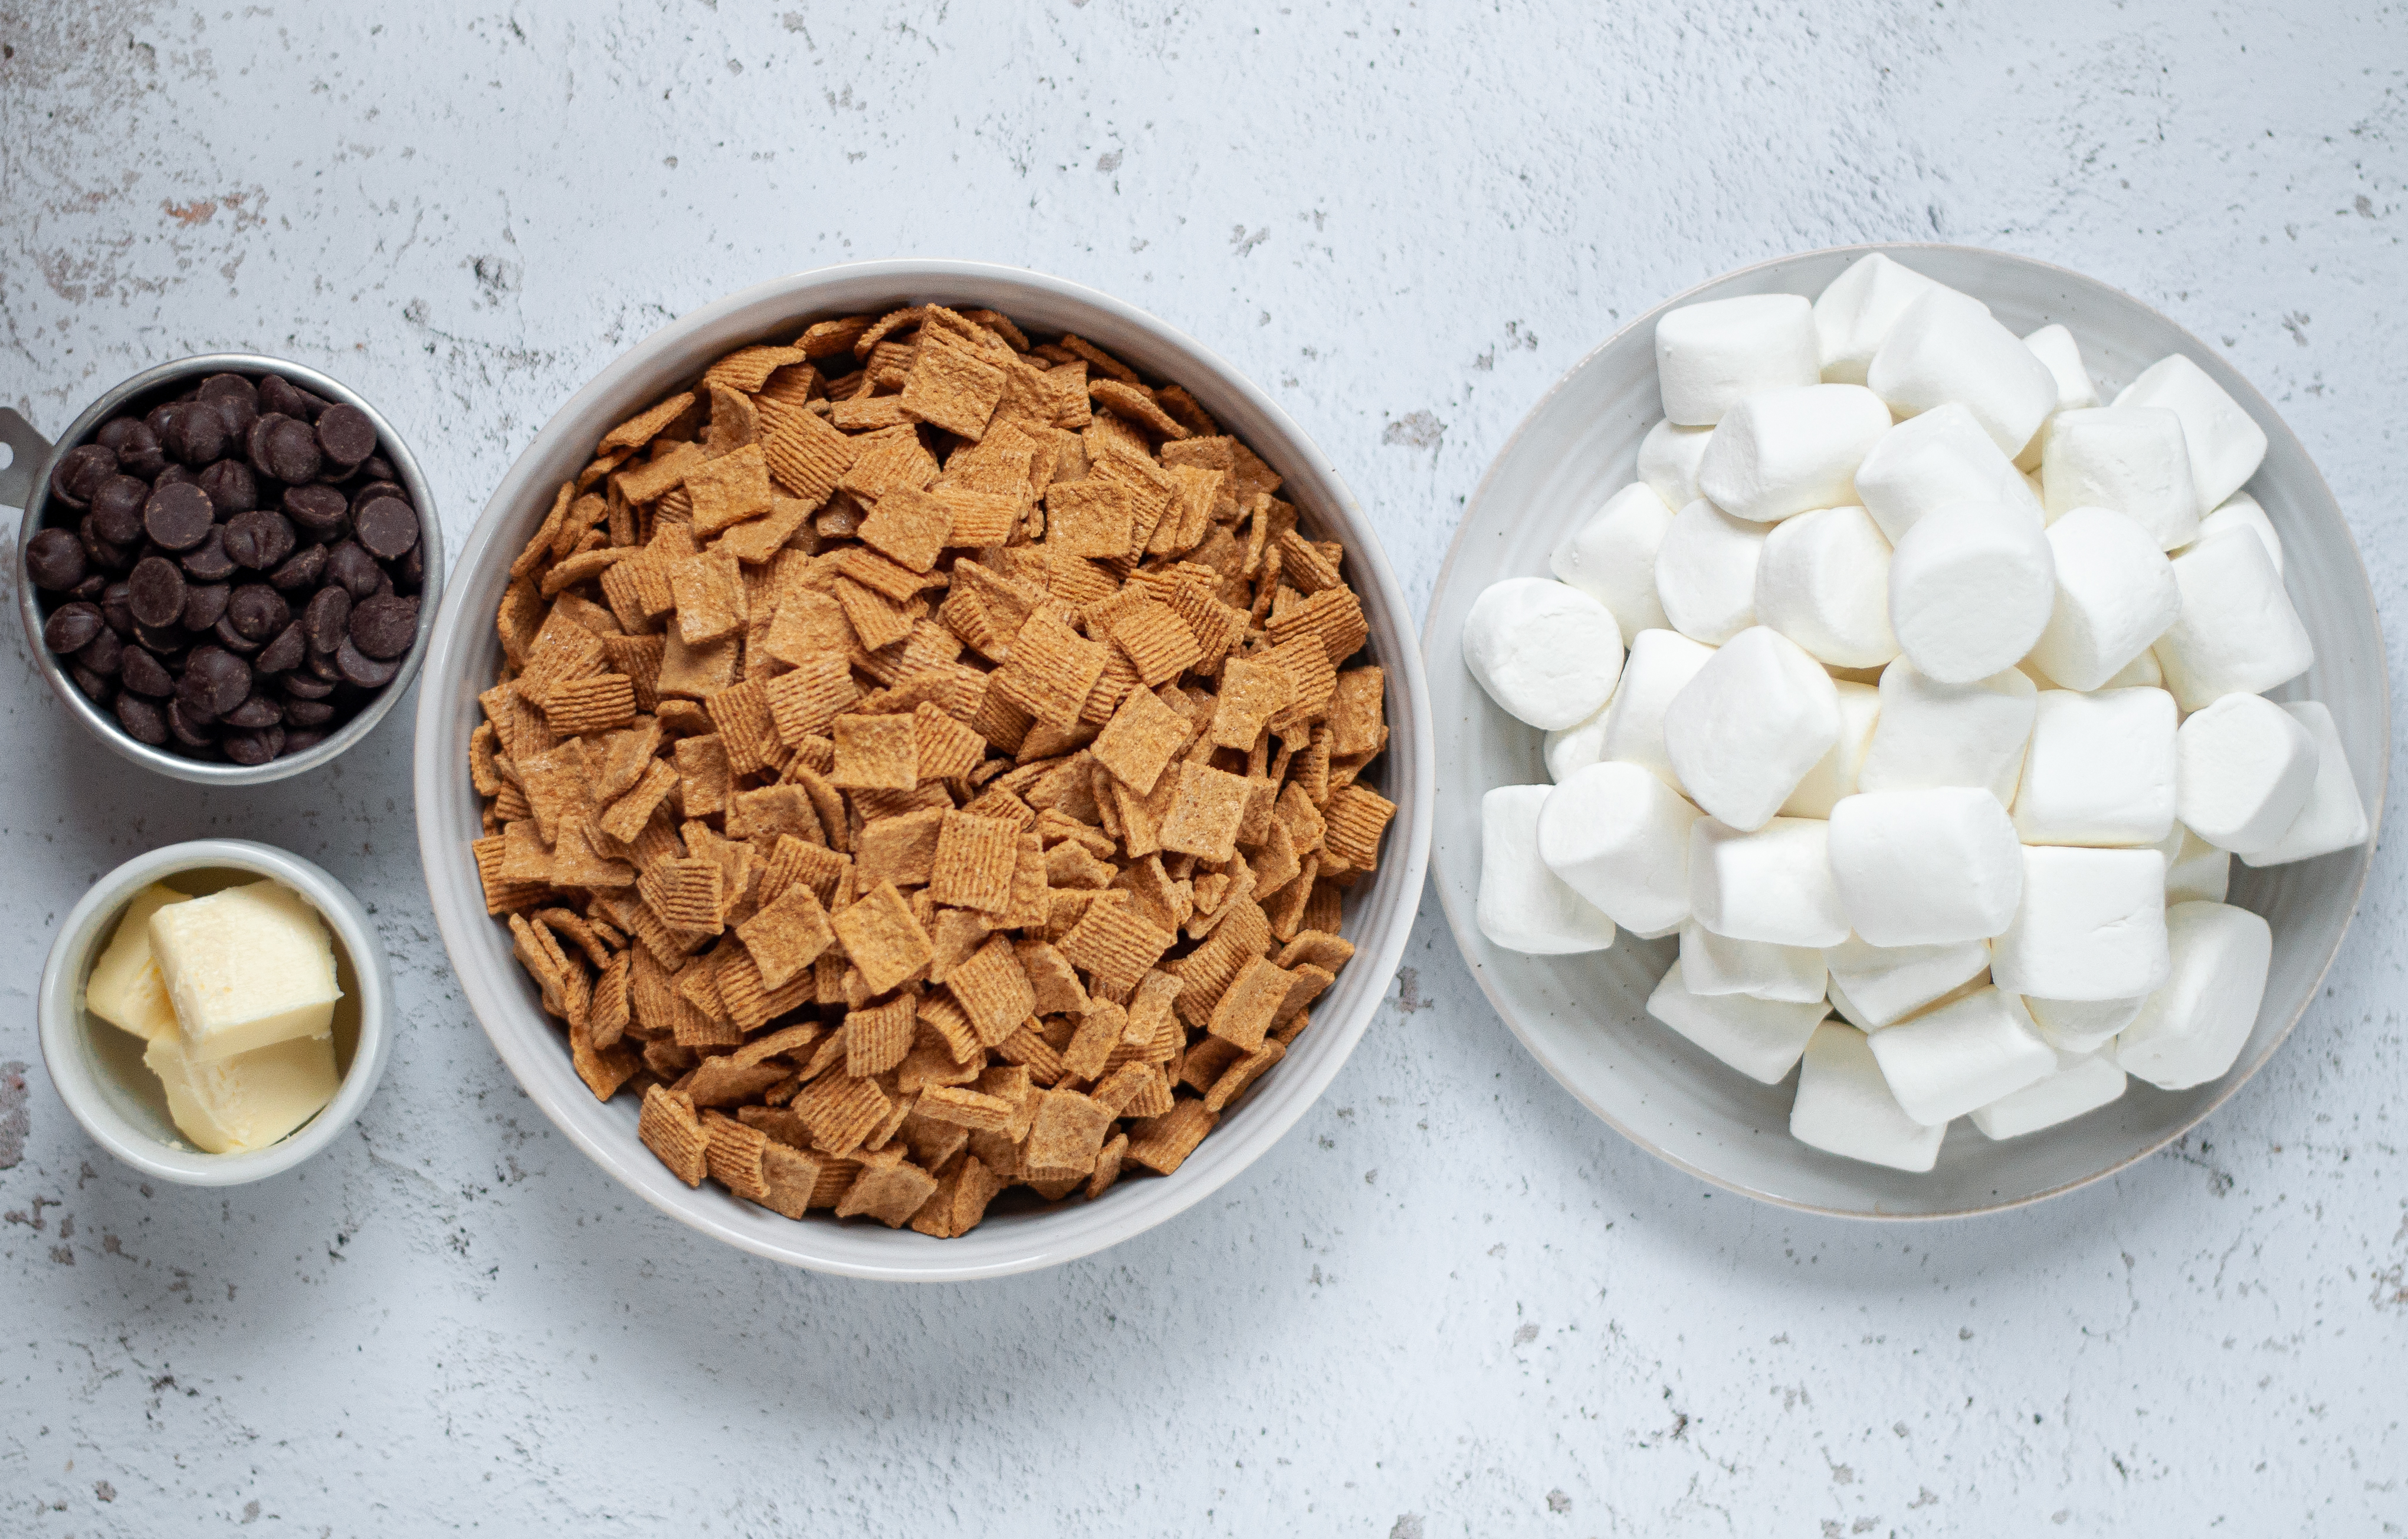 Ingredient shot for this cereal bars recipe. Includes a measuring cup filled with chocolate chips, 3 tablespoons of butter in a small bowl, a large bowl of graham cereal, and a large plate with jet-puffed marshmallows.